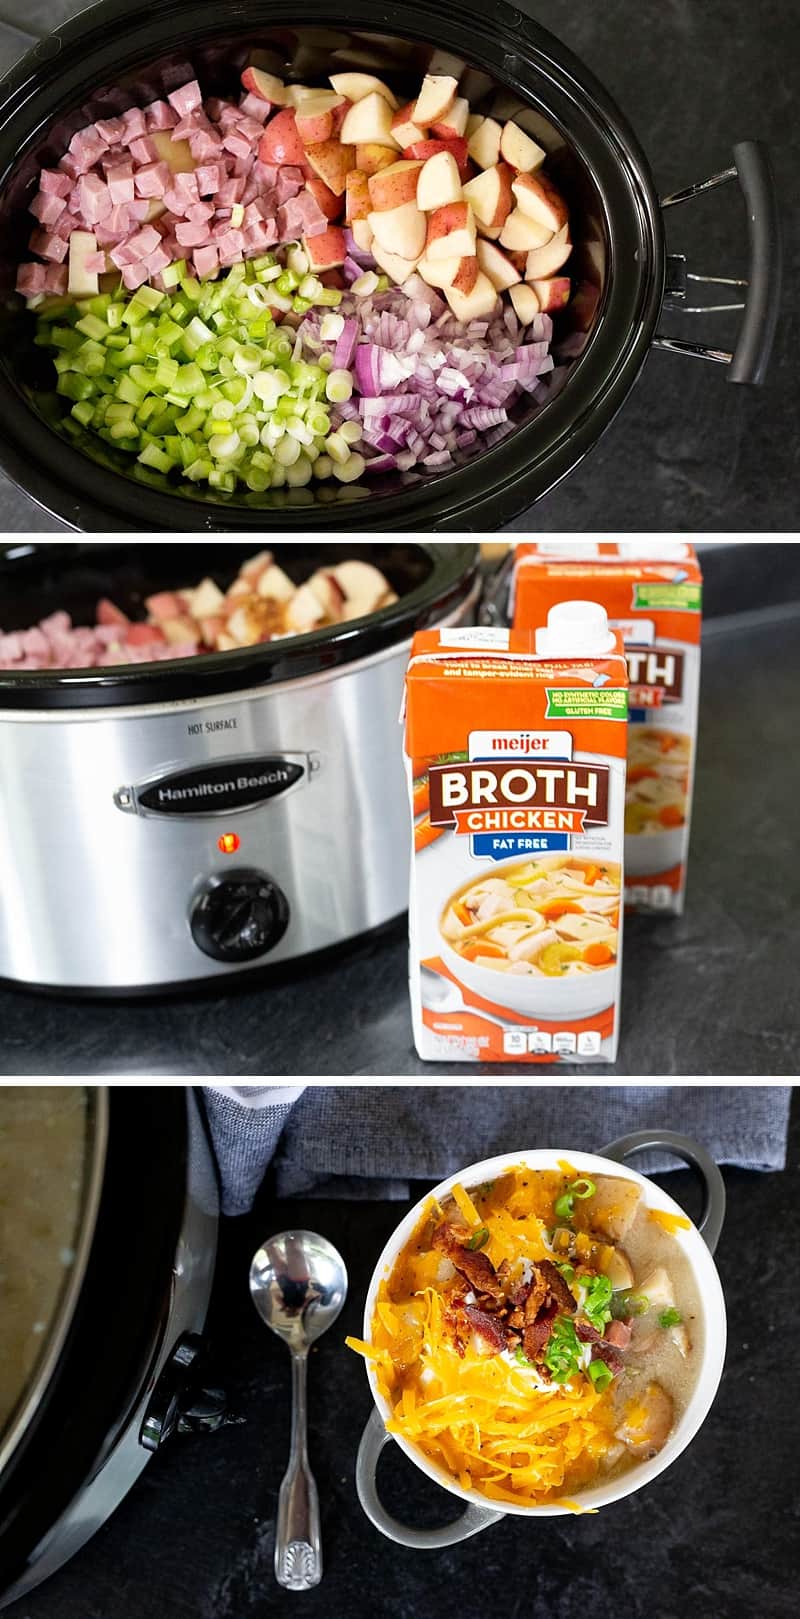 The slow cooker makes this meal super-easy: Just dice a few fresh ingredients, pop 'em into the Crock-Pot, and wait for the magic to happen . . .  #Recipe #CrockPot #CrockPotSoup #Soup #SoupRecipe #SlowCooker #PotatoSoup #EasyRecipe #EasyPeasyFood *Love making this Crock-Pot potato soup recipe with my kids! Such a great way to connect and so delicious!